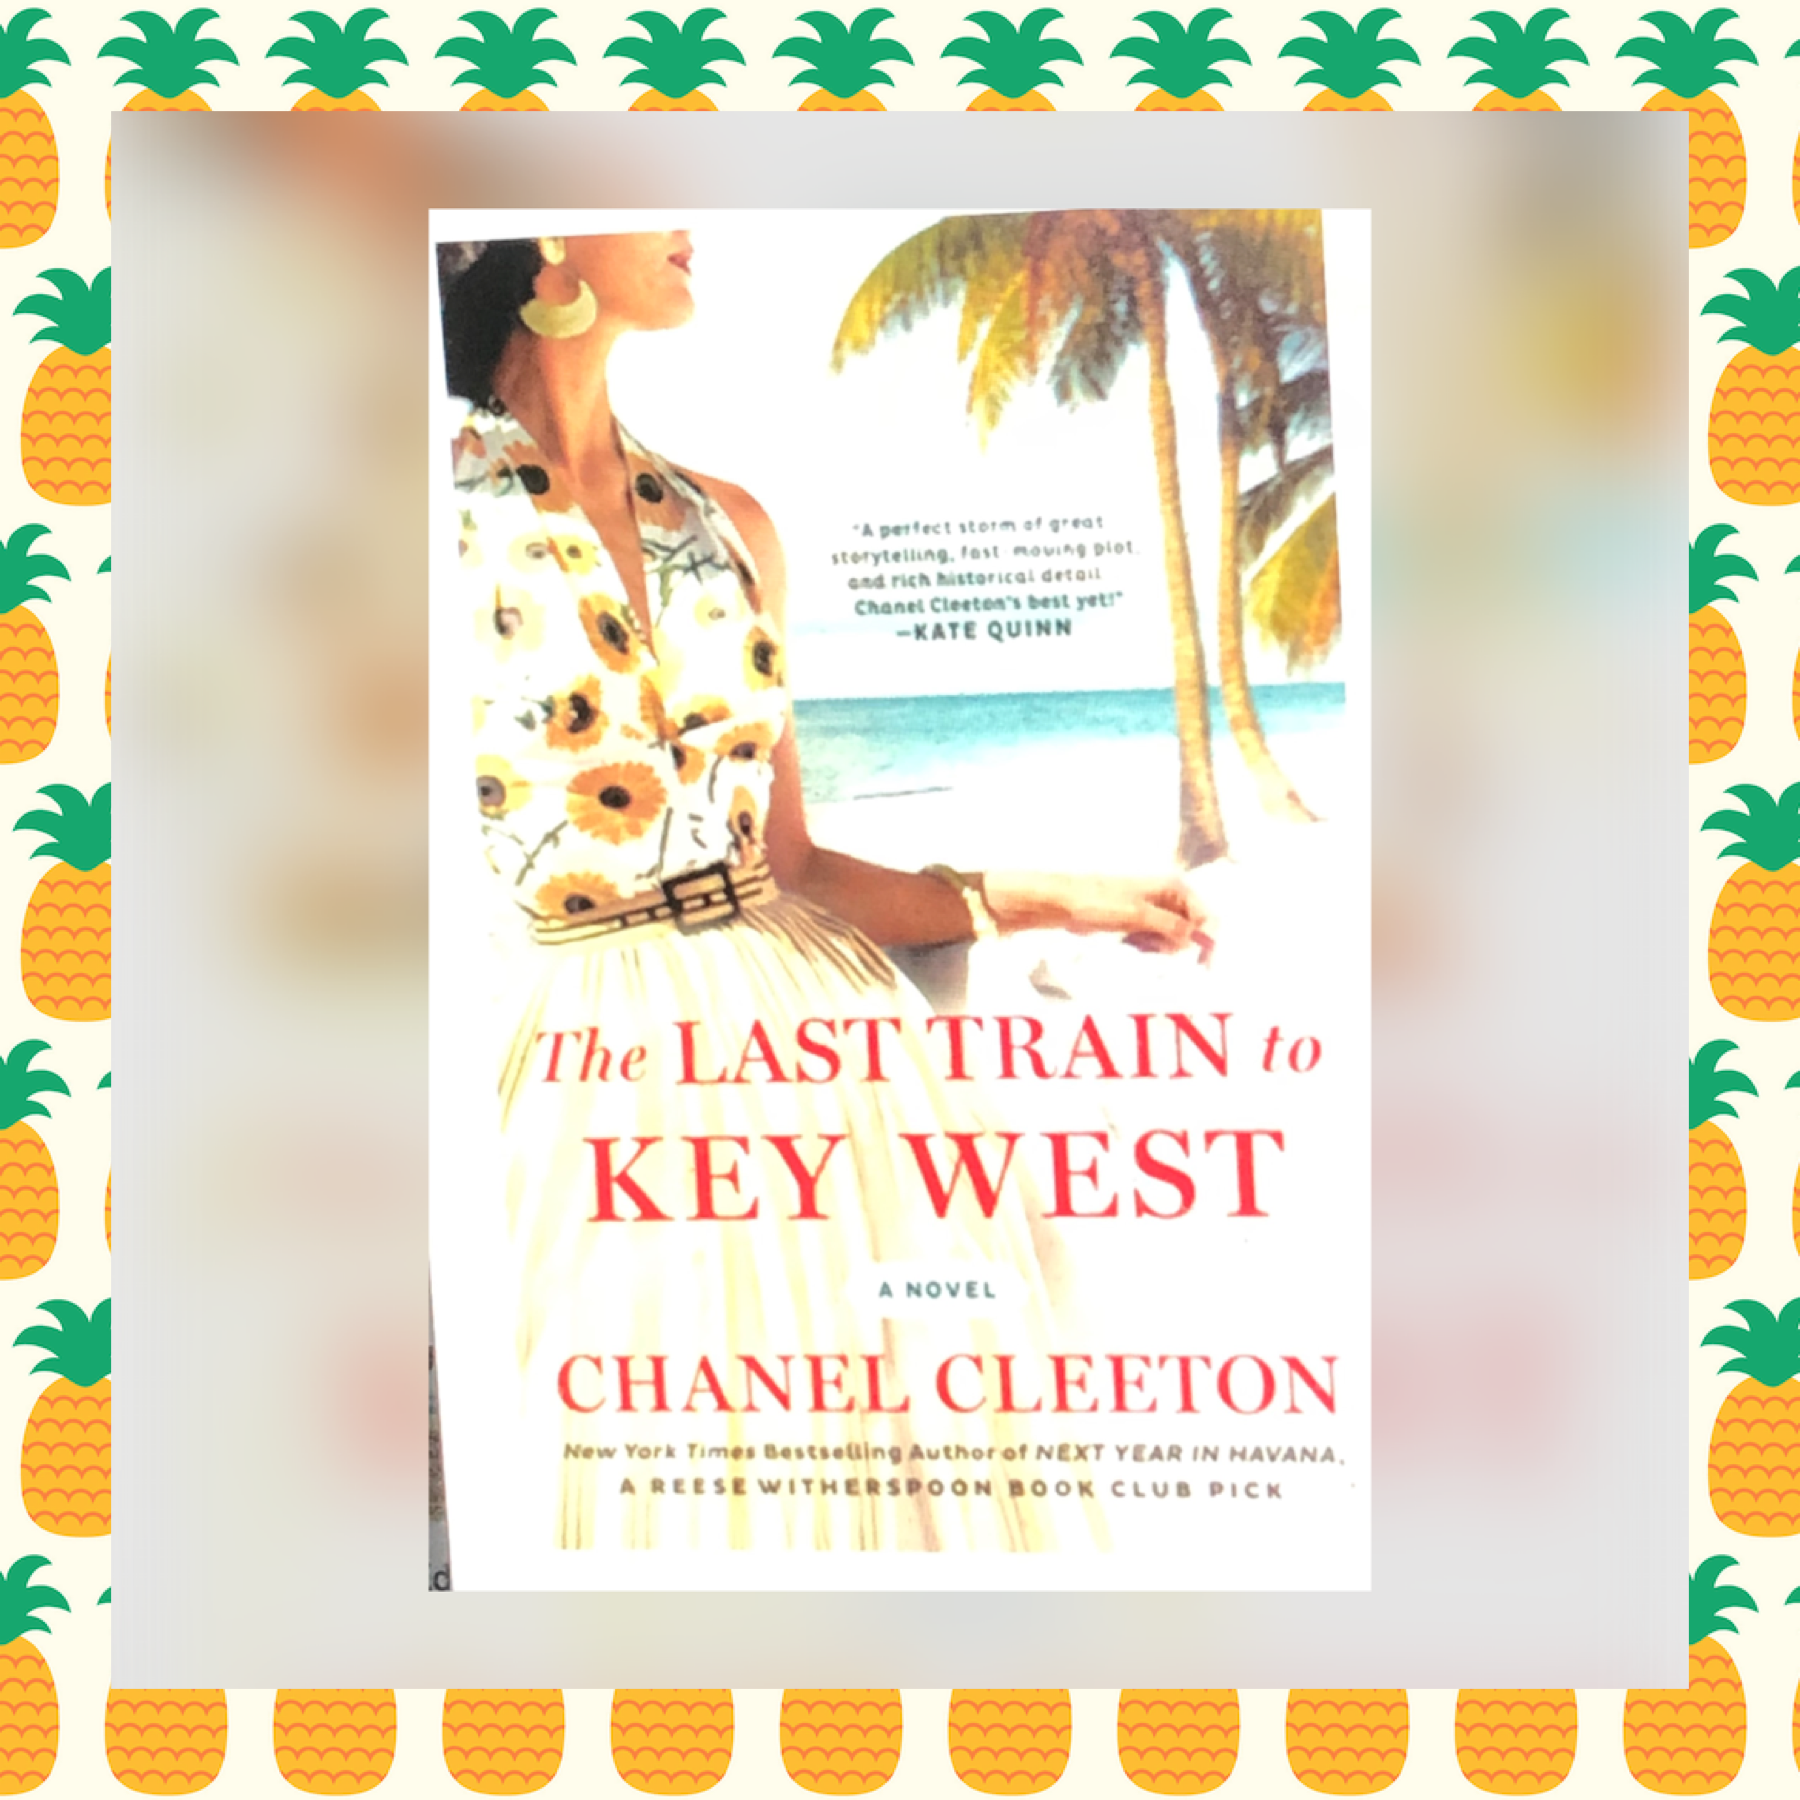 Chanel Cleeton, author of NEXT YEAR IN HAVANA and LAST TRAIN TO KEY WEST